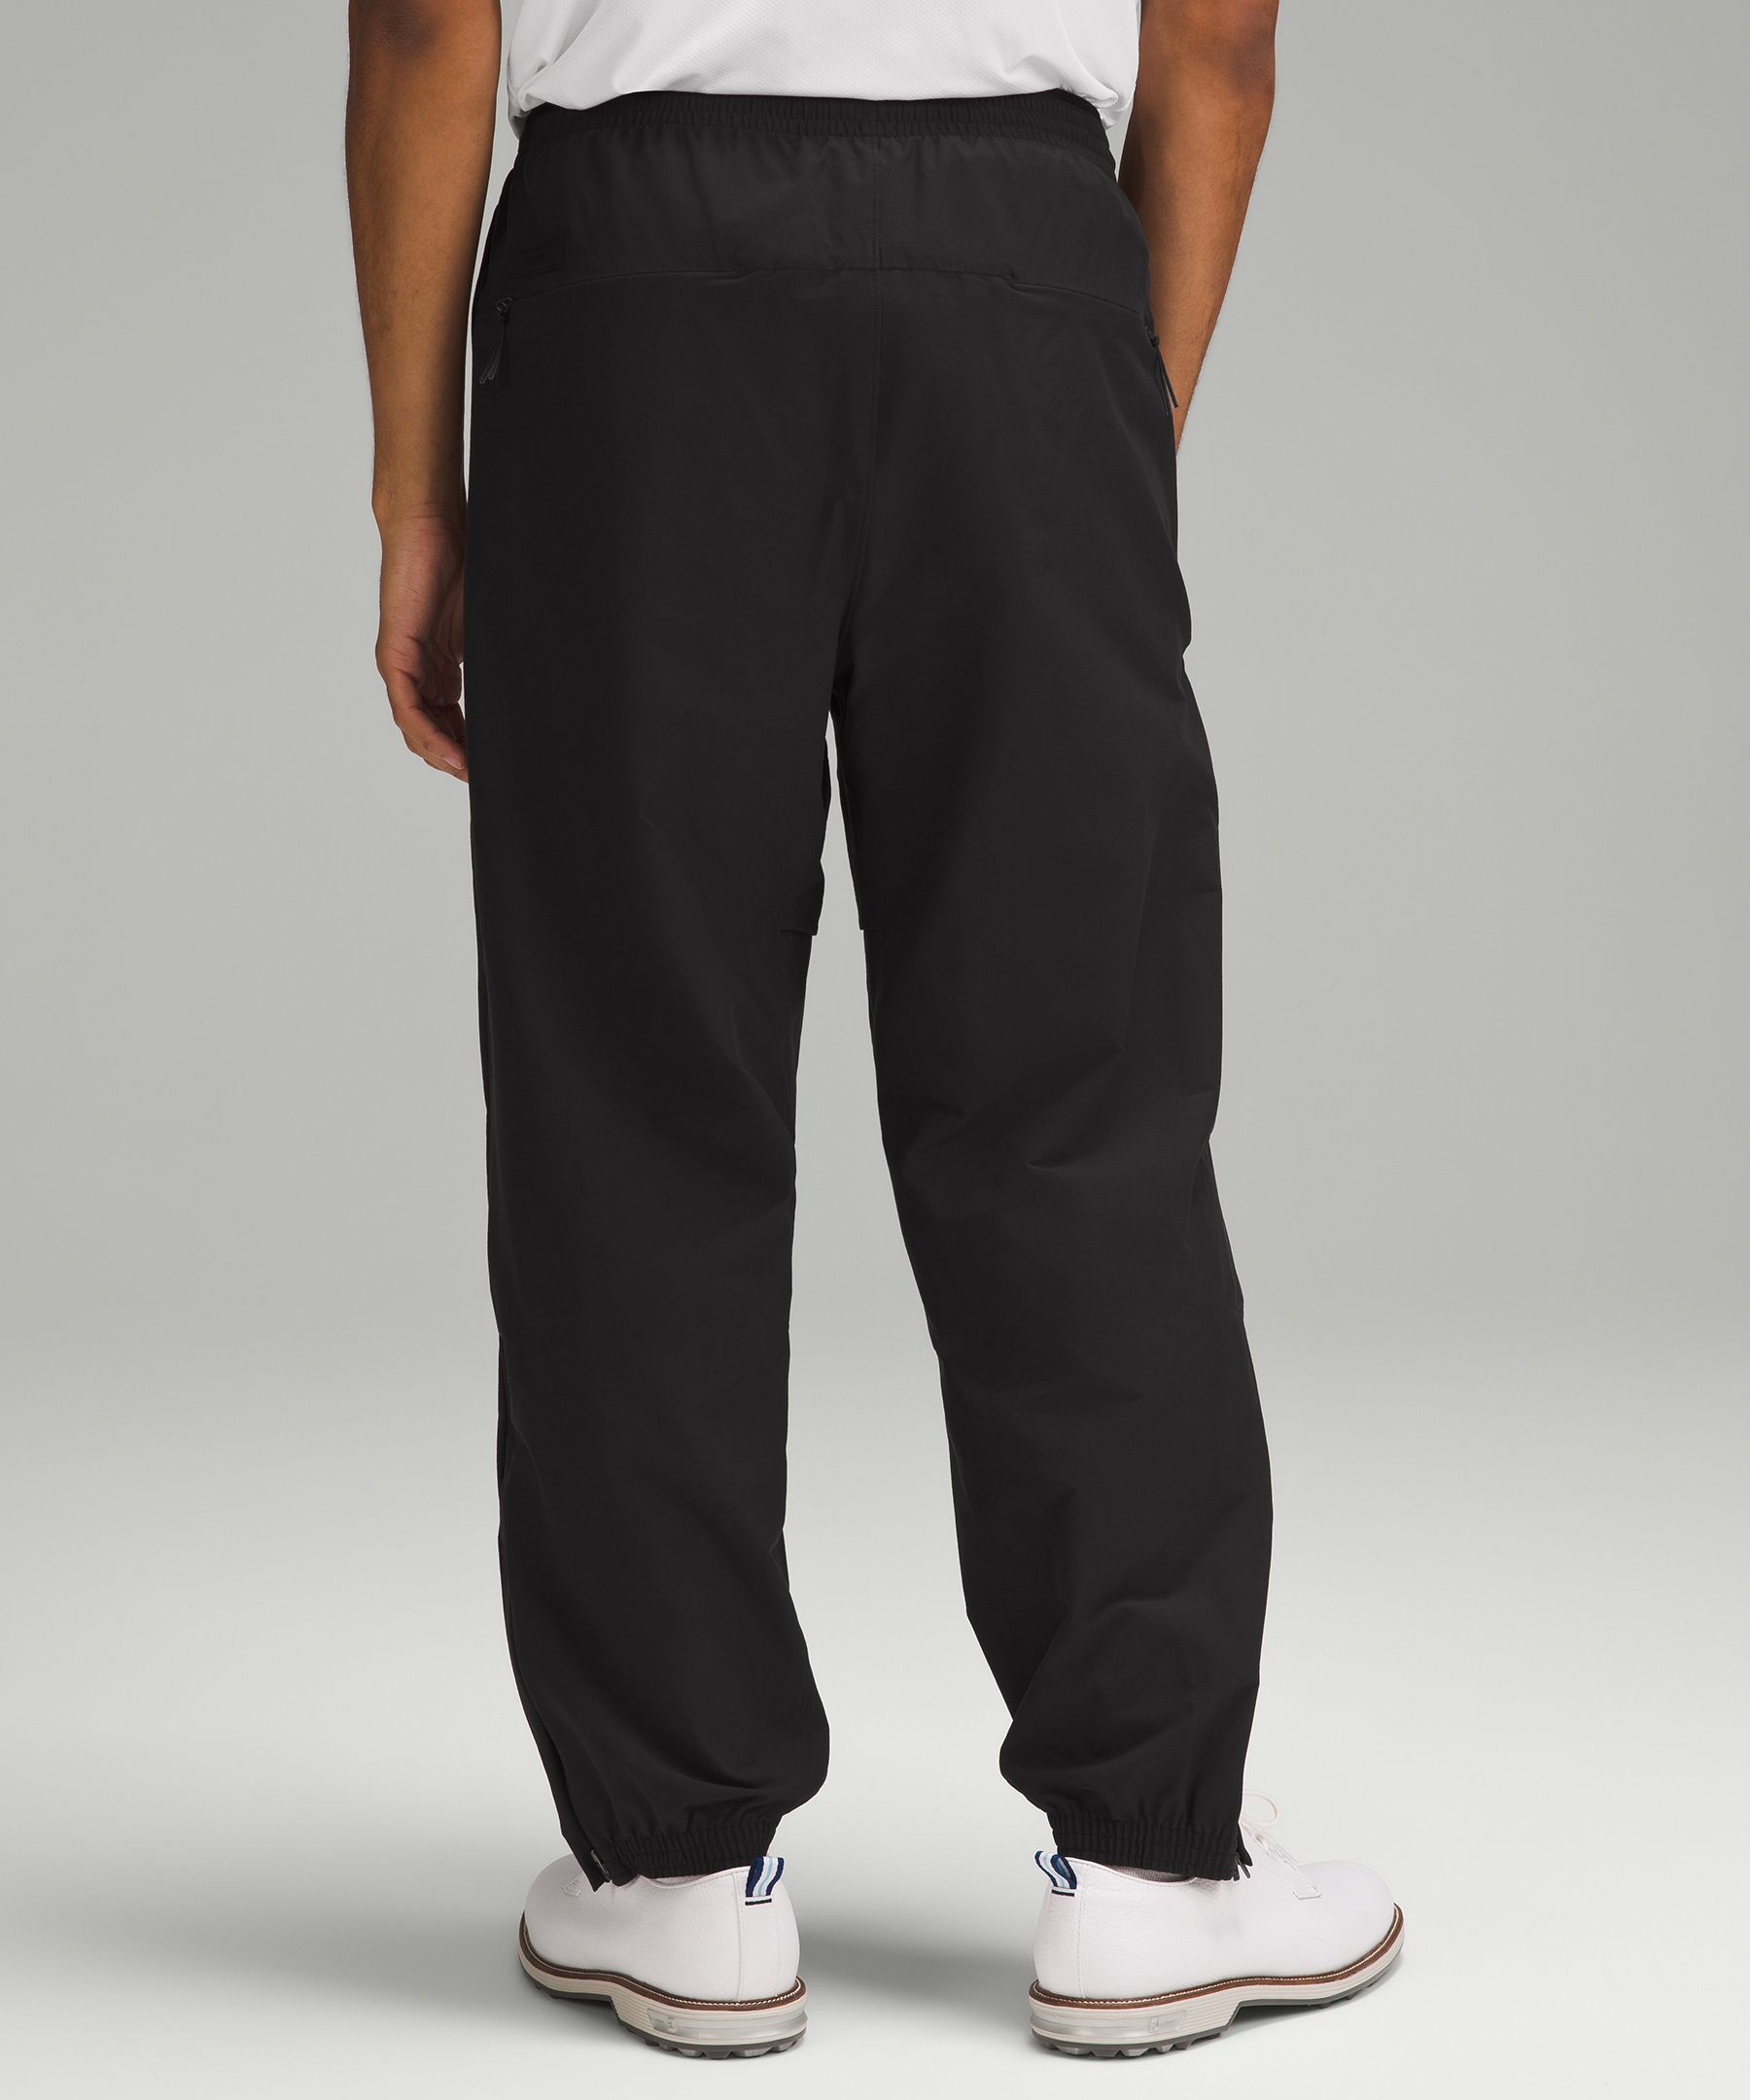 Lululemon athletica Water-Repellent Pull-On Golf Pant